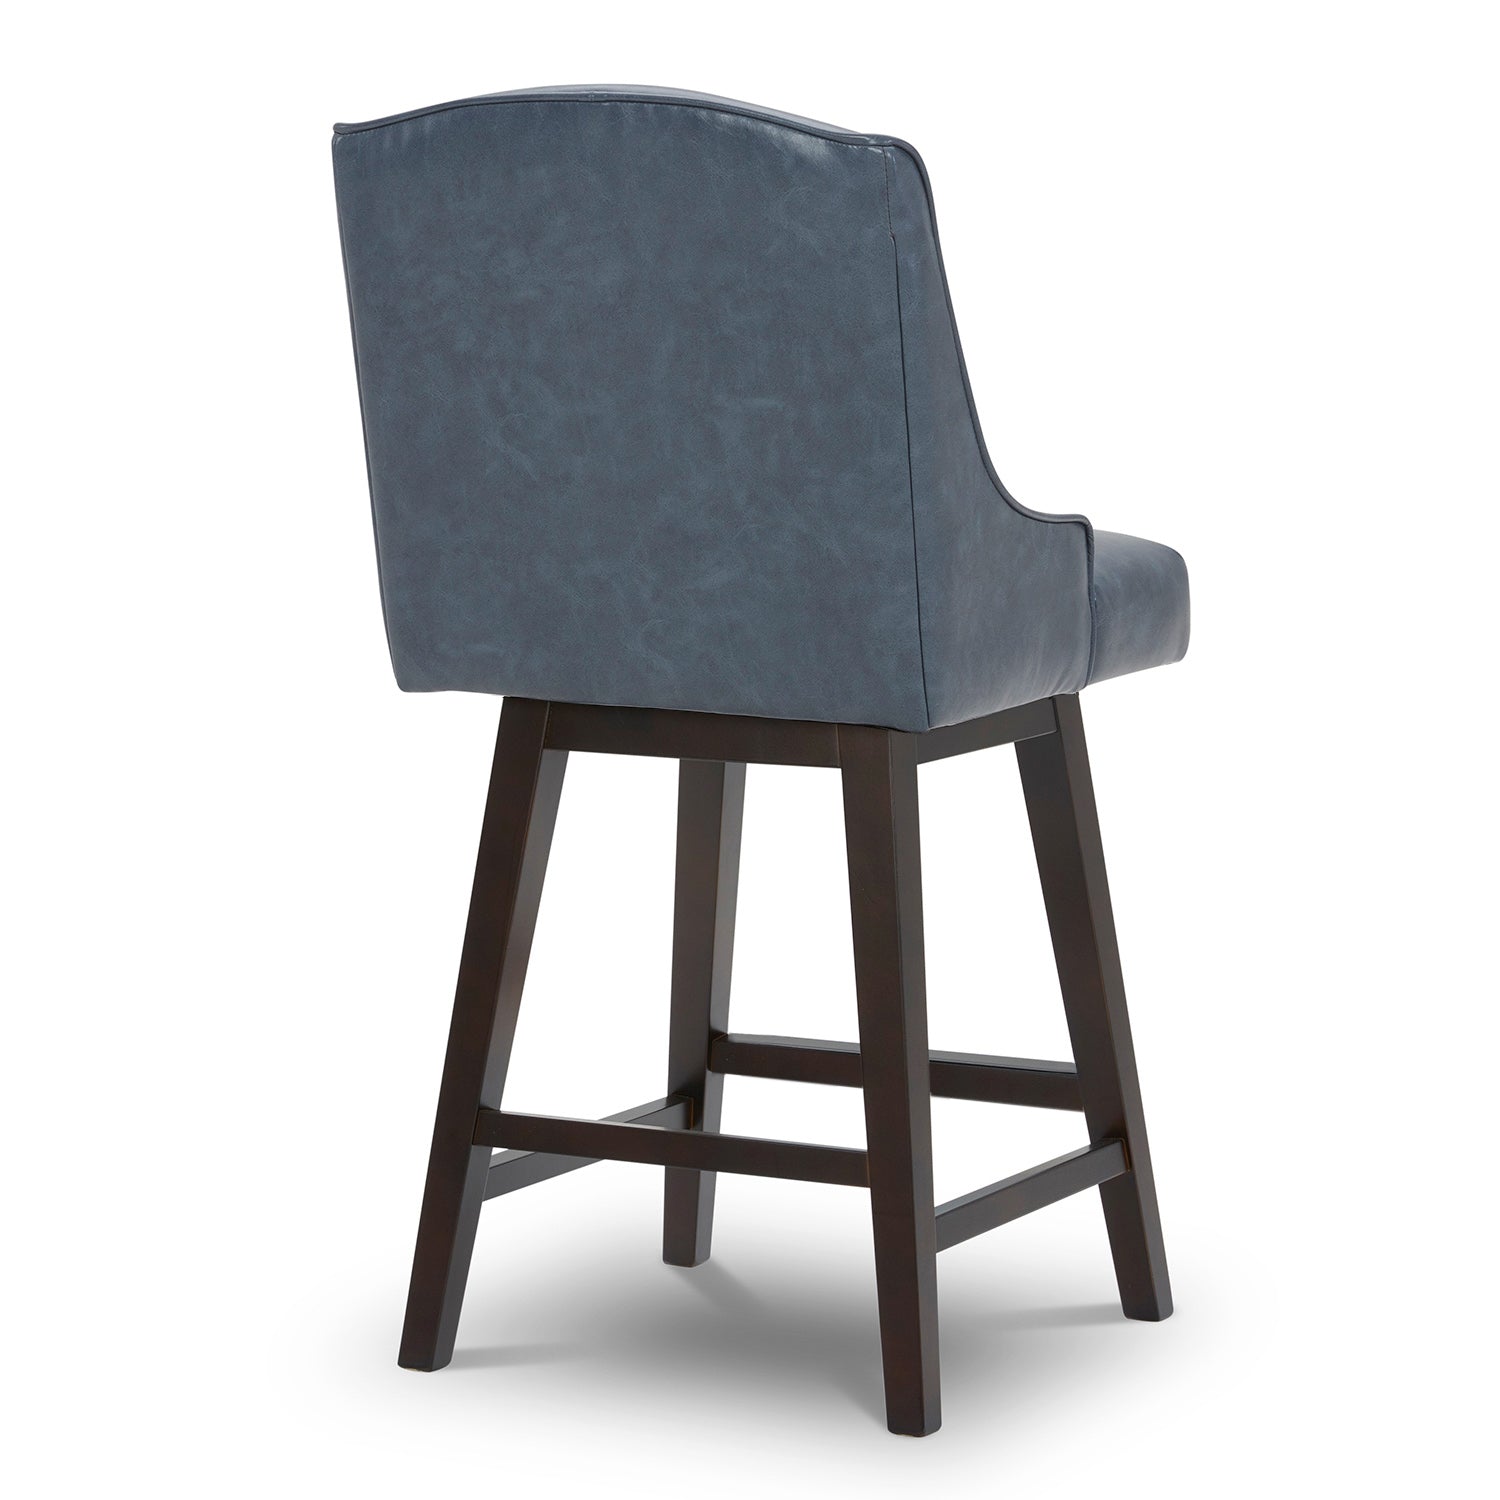 CHITA LIVING-Ryker Transitional Swivel Counter Stool - Fabric & Leather-Counter Stools-Faux Leather-Navy Blue-2 Pack